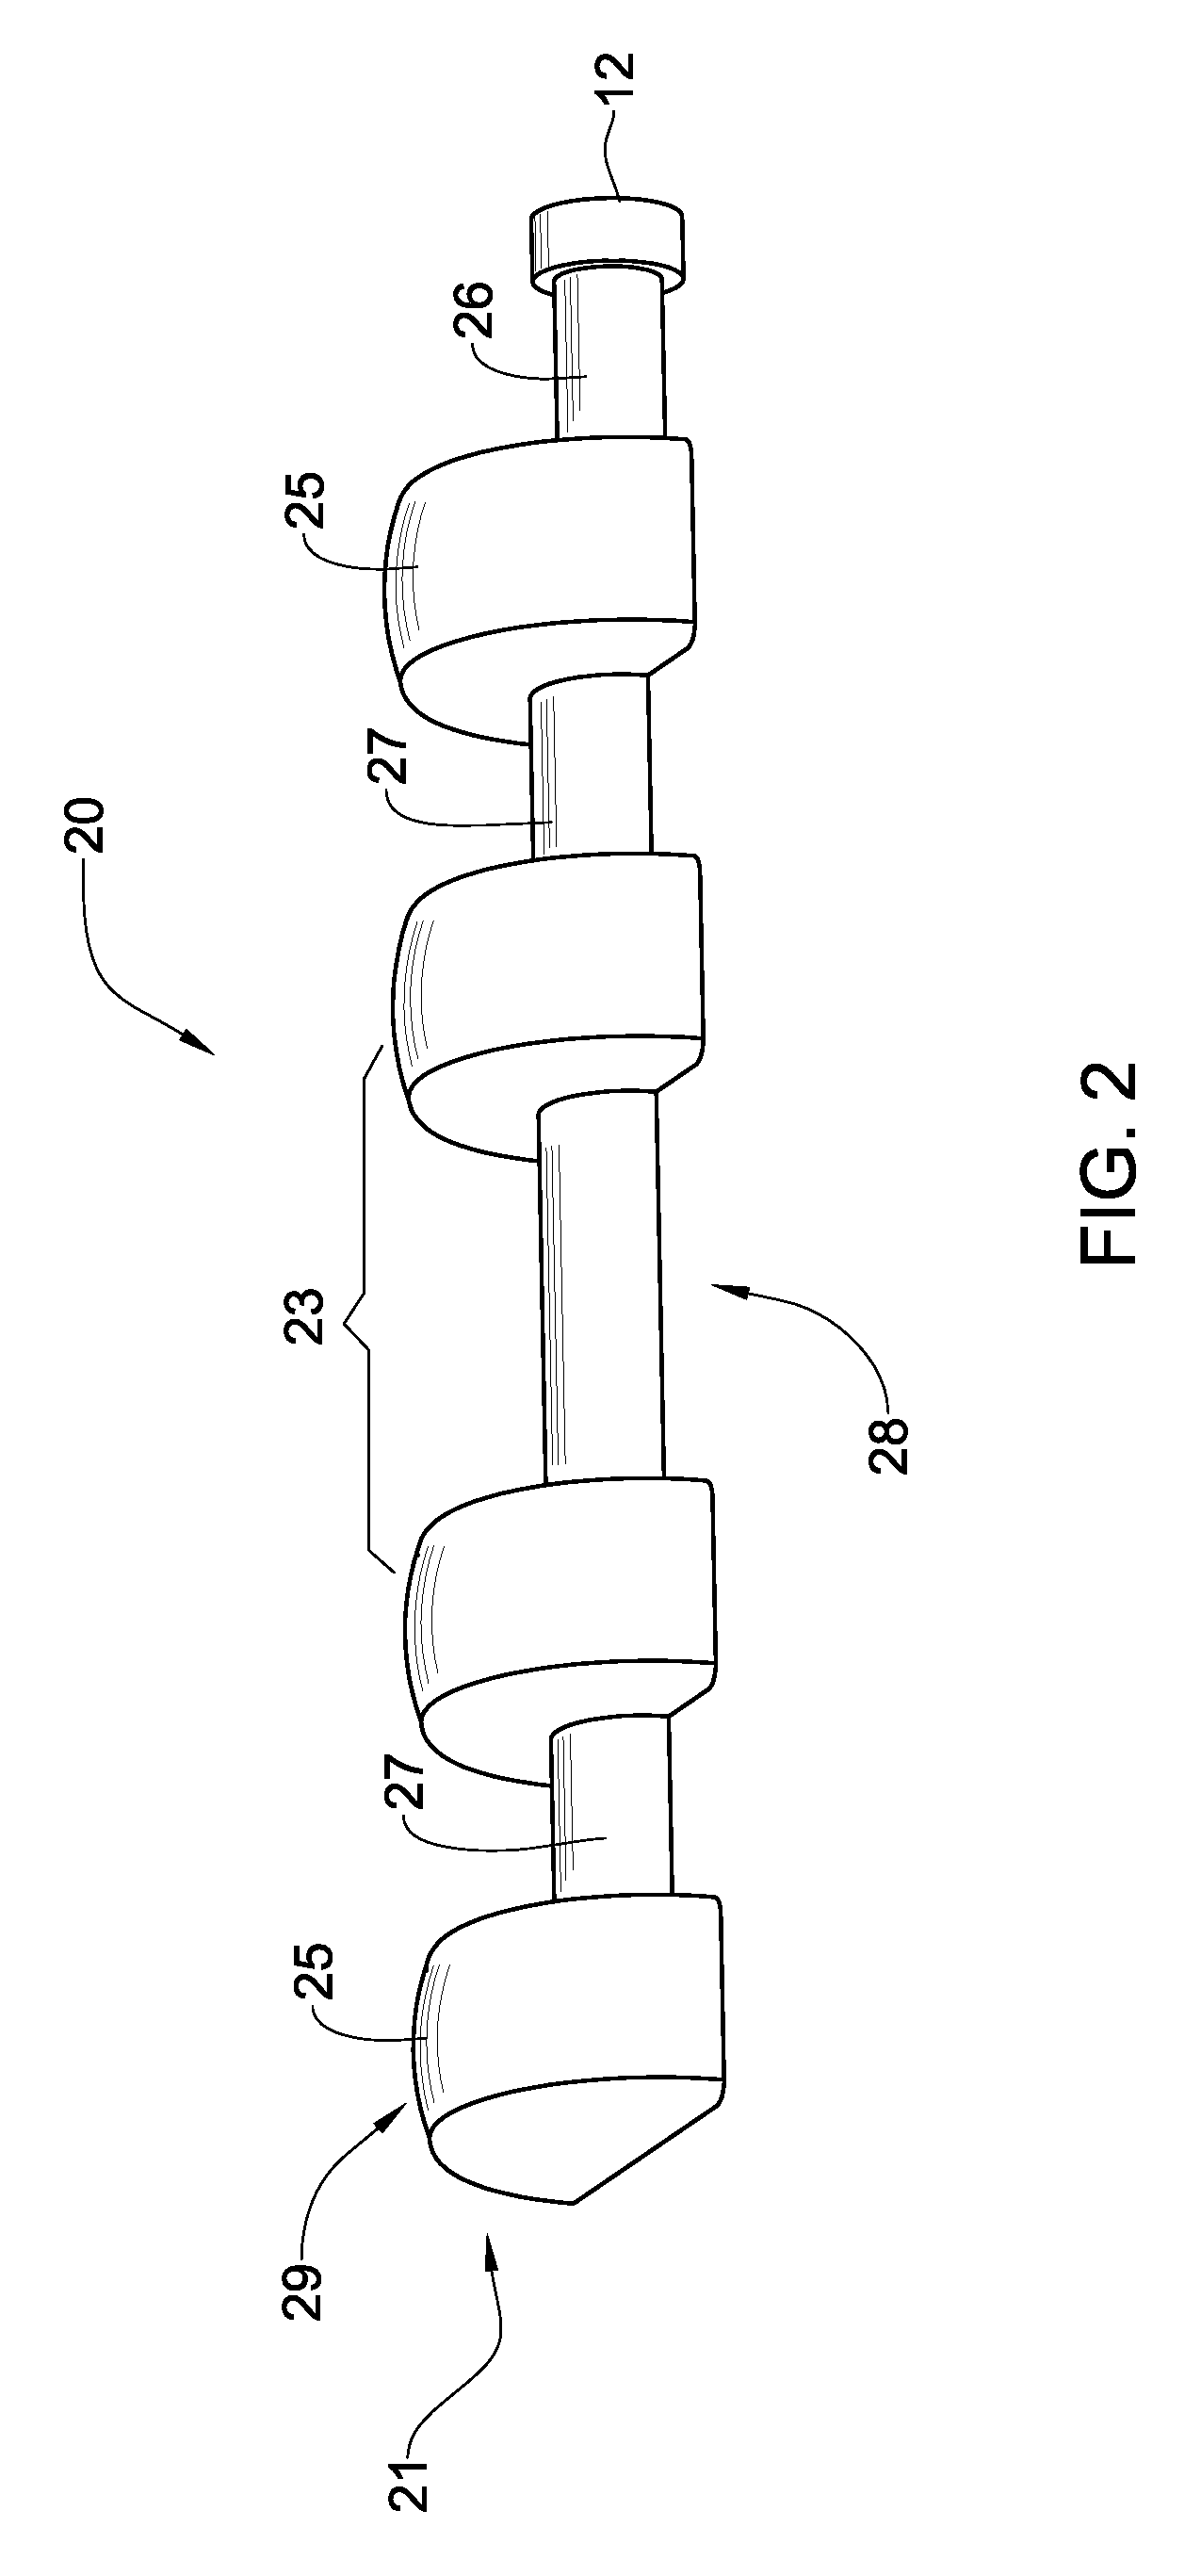 Method and massage device for stimulating active points located on a human back